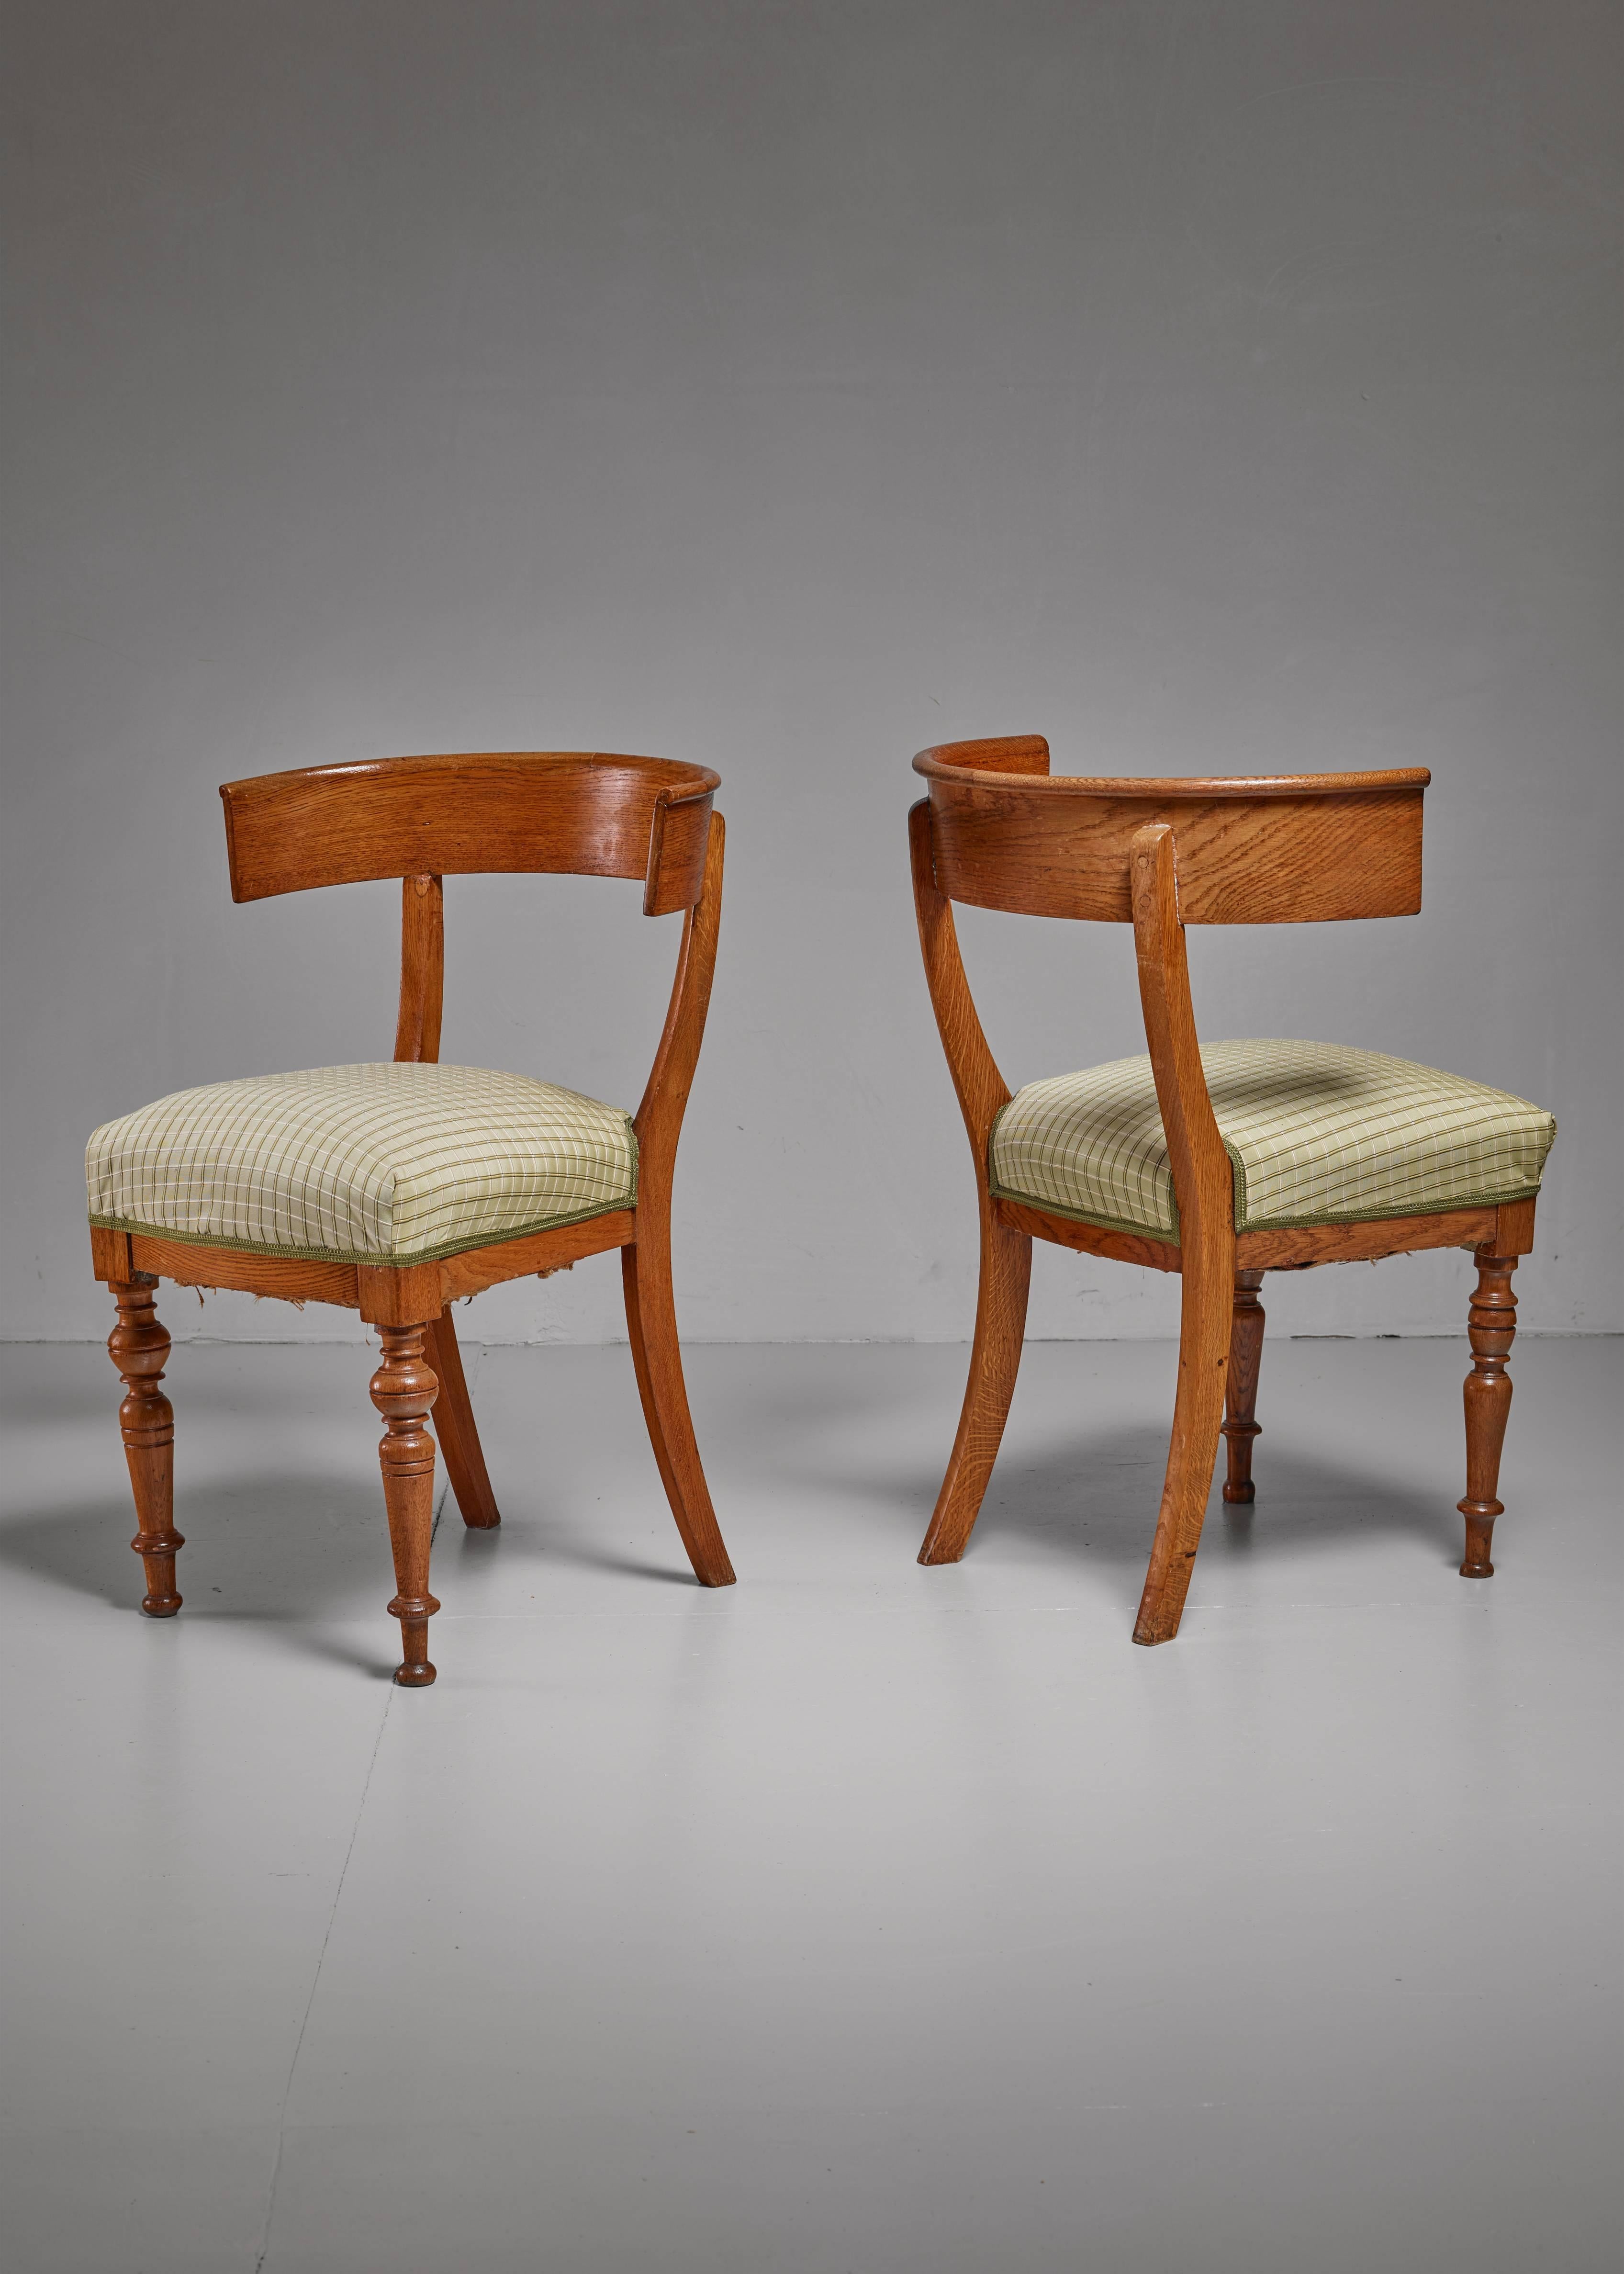 A pair of elegant Swedish oak Klismos chairs. The chairs have a curved backrest and sculpted legs in the front and sabre legs in the back.

* This set is curated for you by Bloomberry *